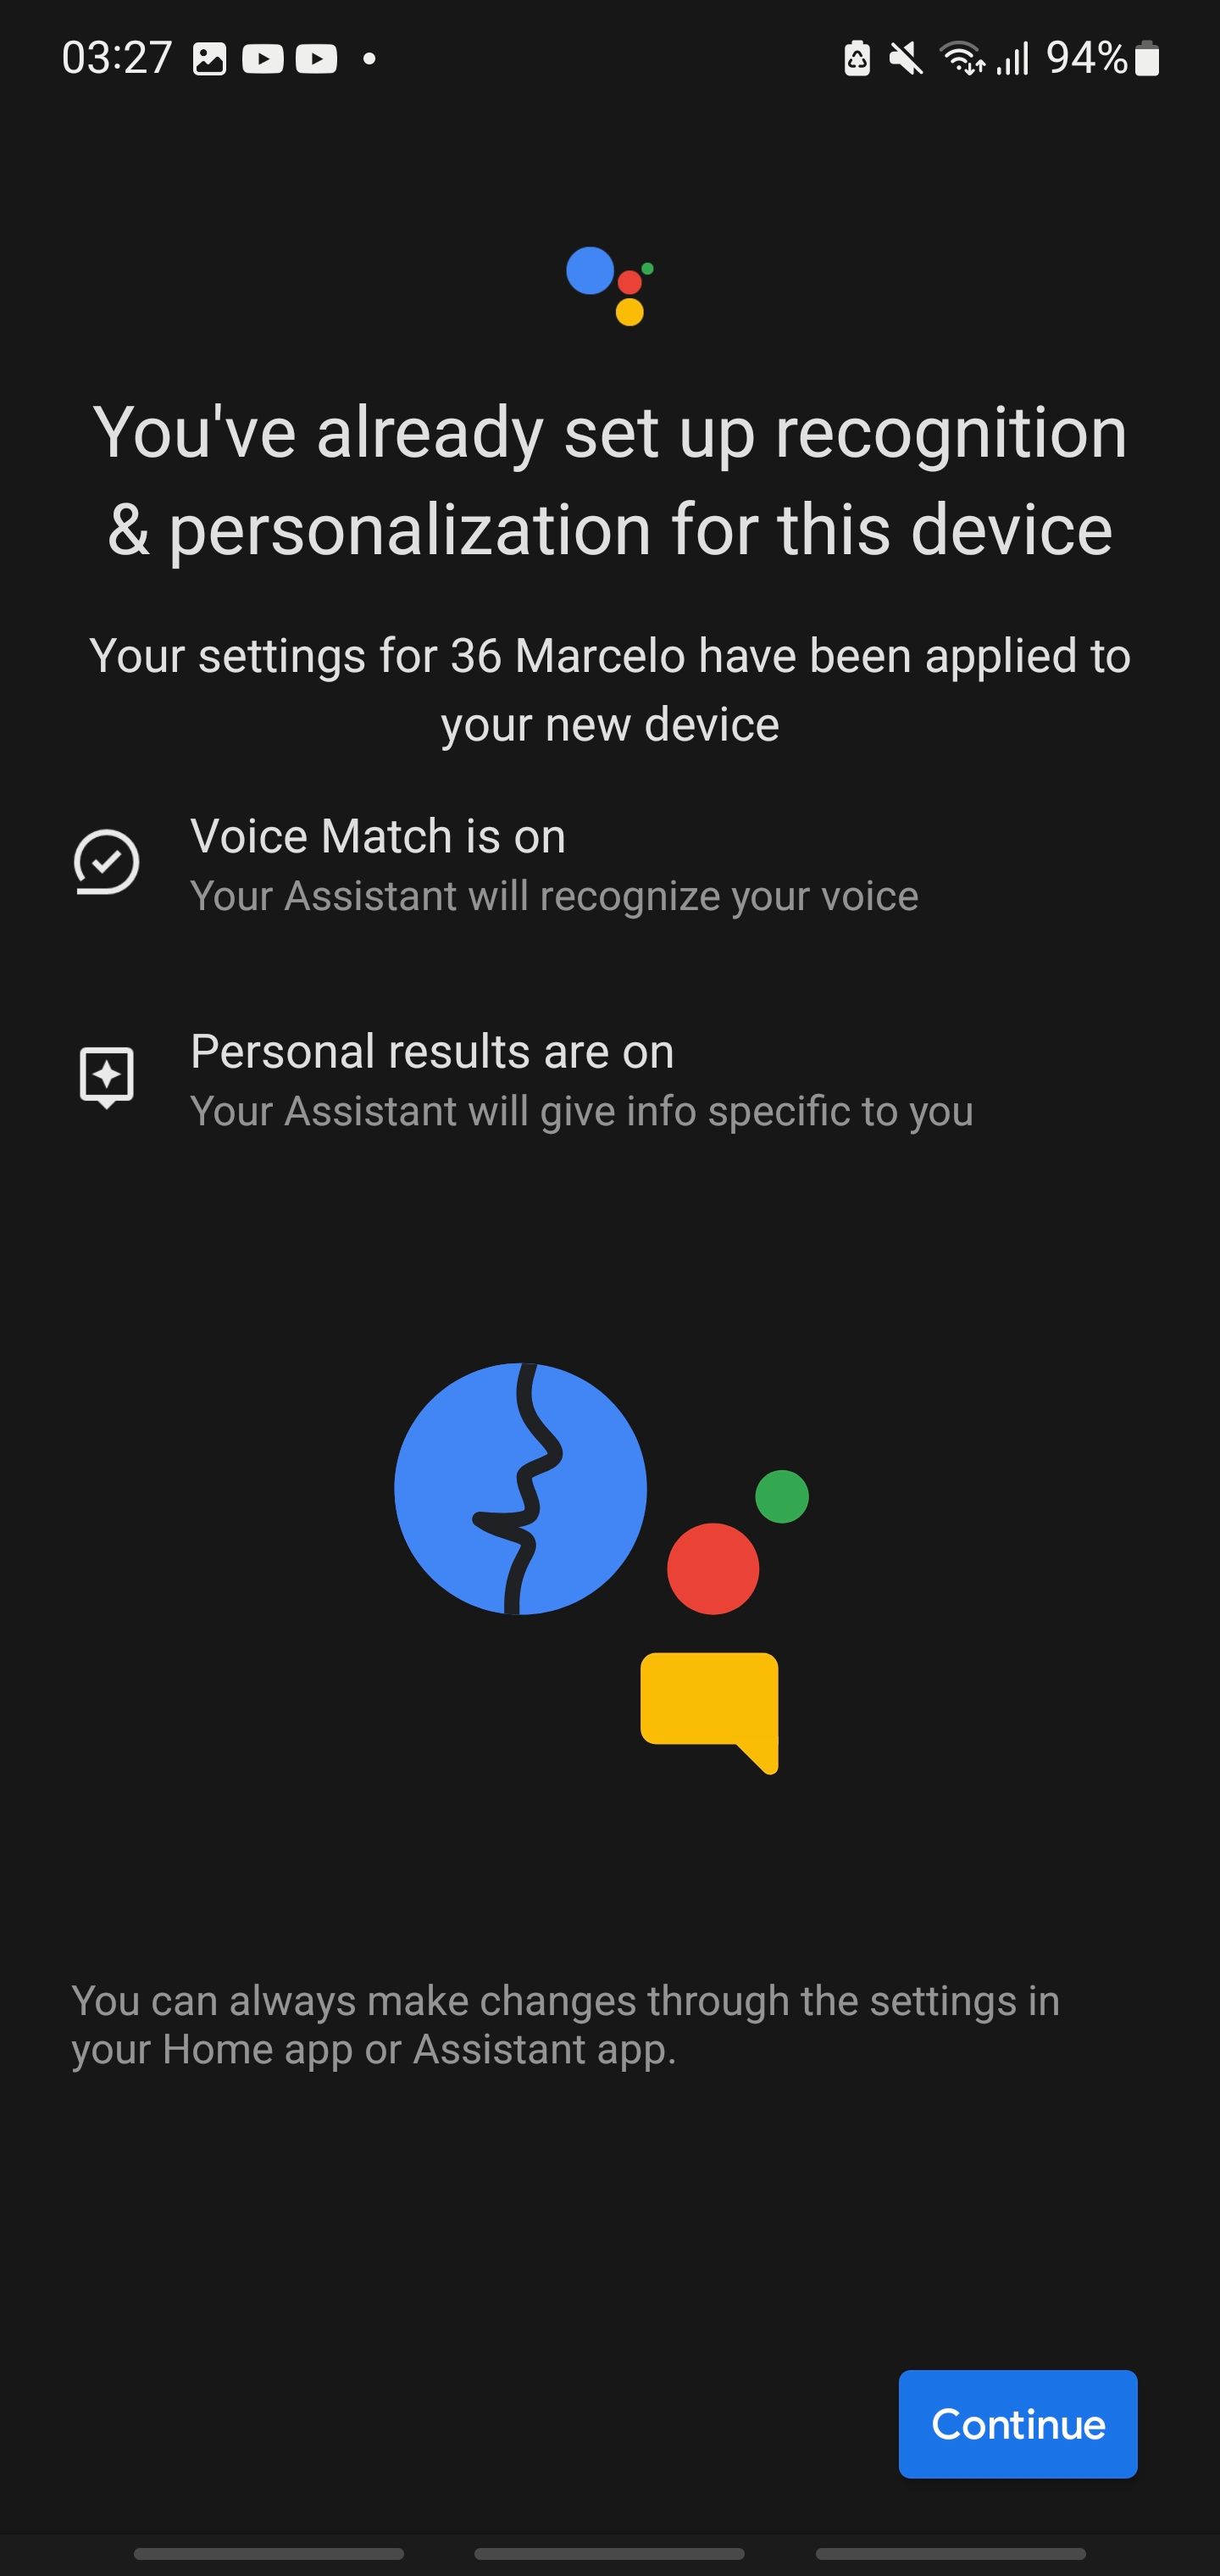 Setting Up Recognition and Personalization settings